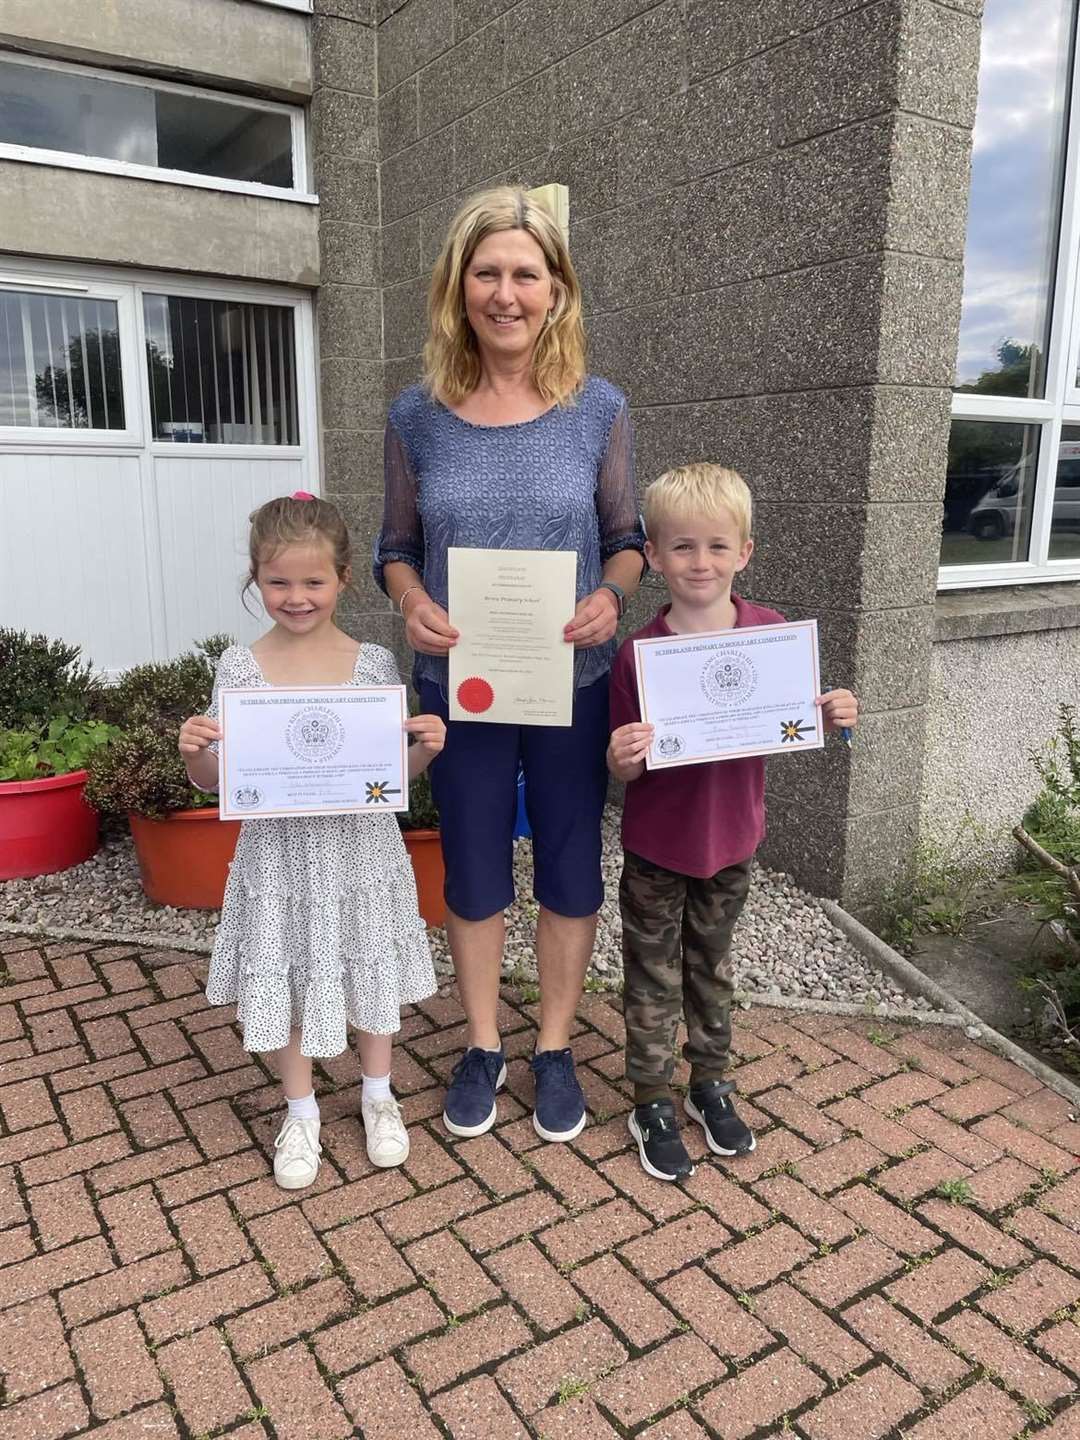 Deputy Lieutenant Dawn McKenzie returned to Brora Primary School, where she was head teacher until retirement last year, to present the coronation art competition certificates. With Dawn are Isla MacNicol, the p1-3 winner, and Evan Roney took first place in the p4-7 class. First in the nursery category was Ailsa Marie.